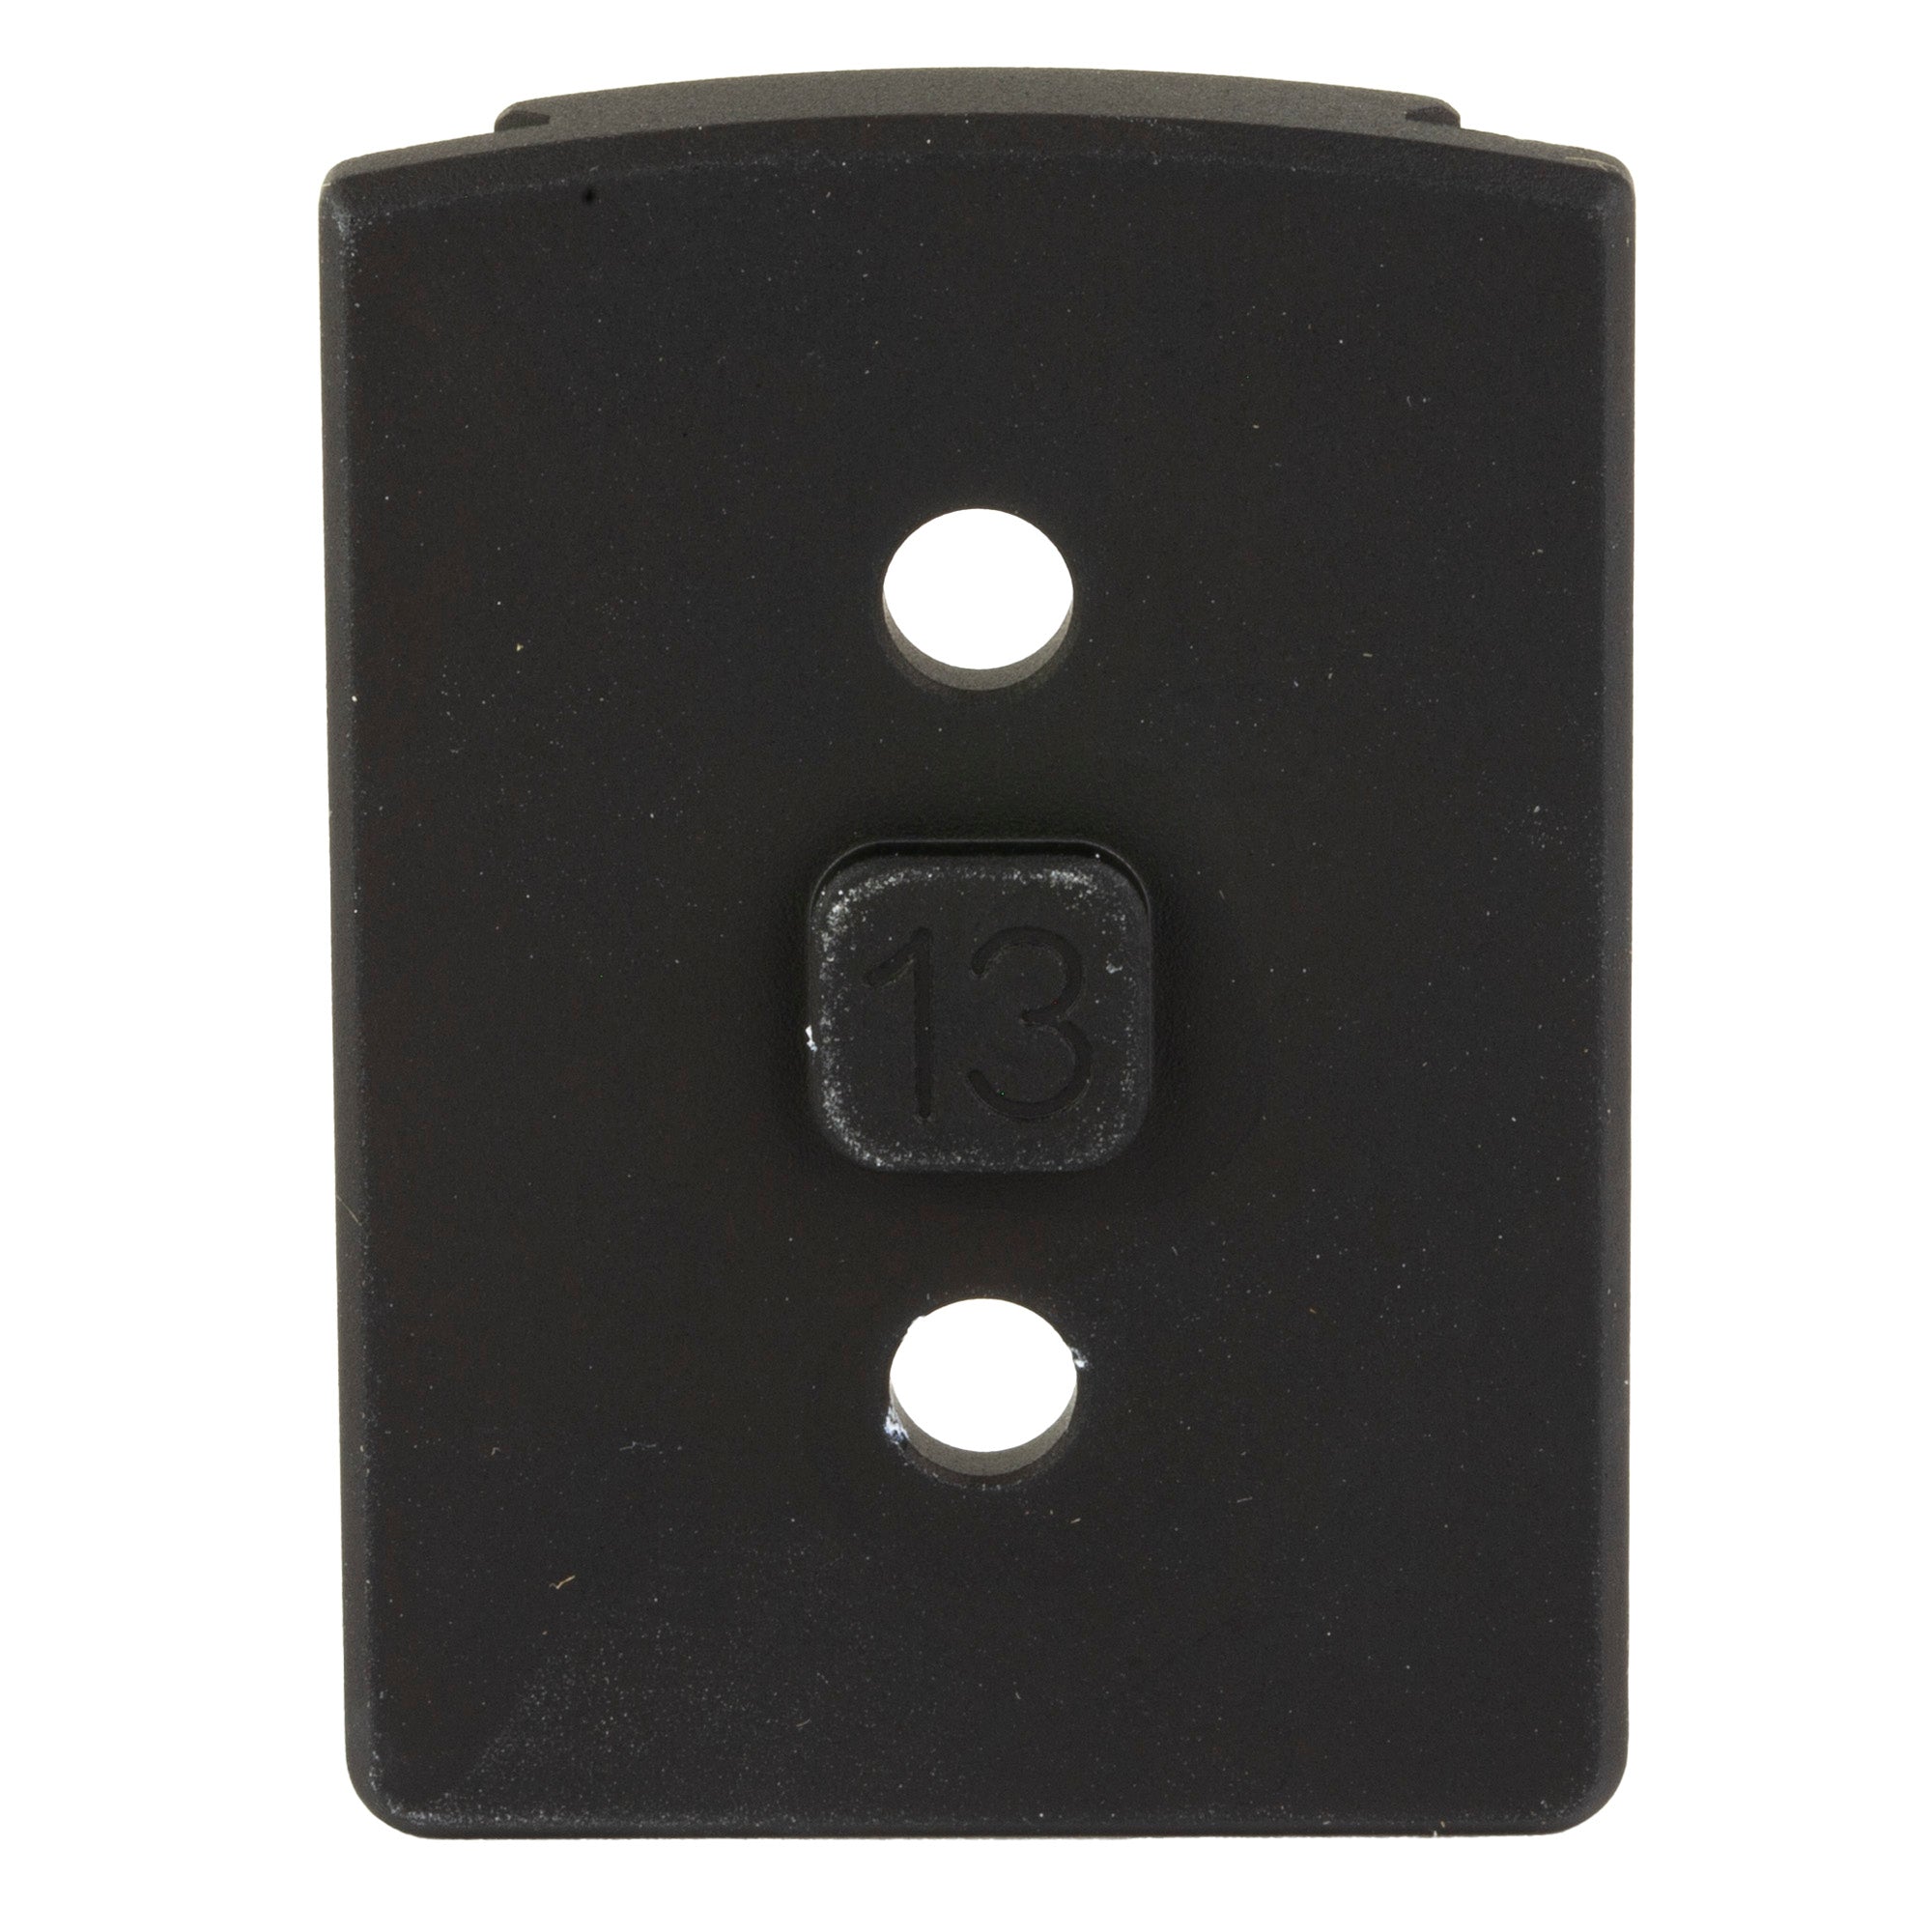 Arisaka Defense Plate 13 - 509T/SCRS - Standard Height for 1.5" to 1.8" Scope Mounts - Plate Only, Base Sold Seperately